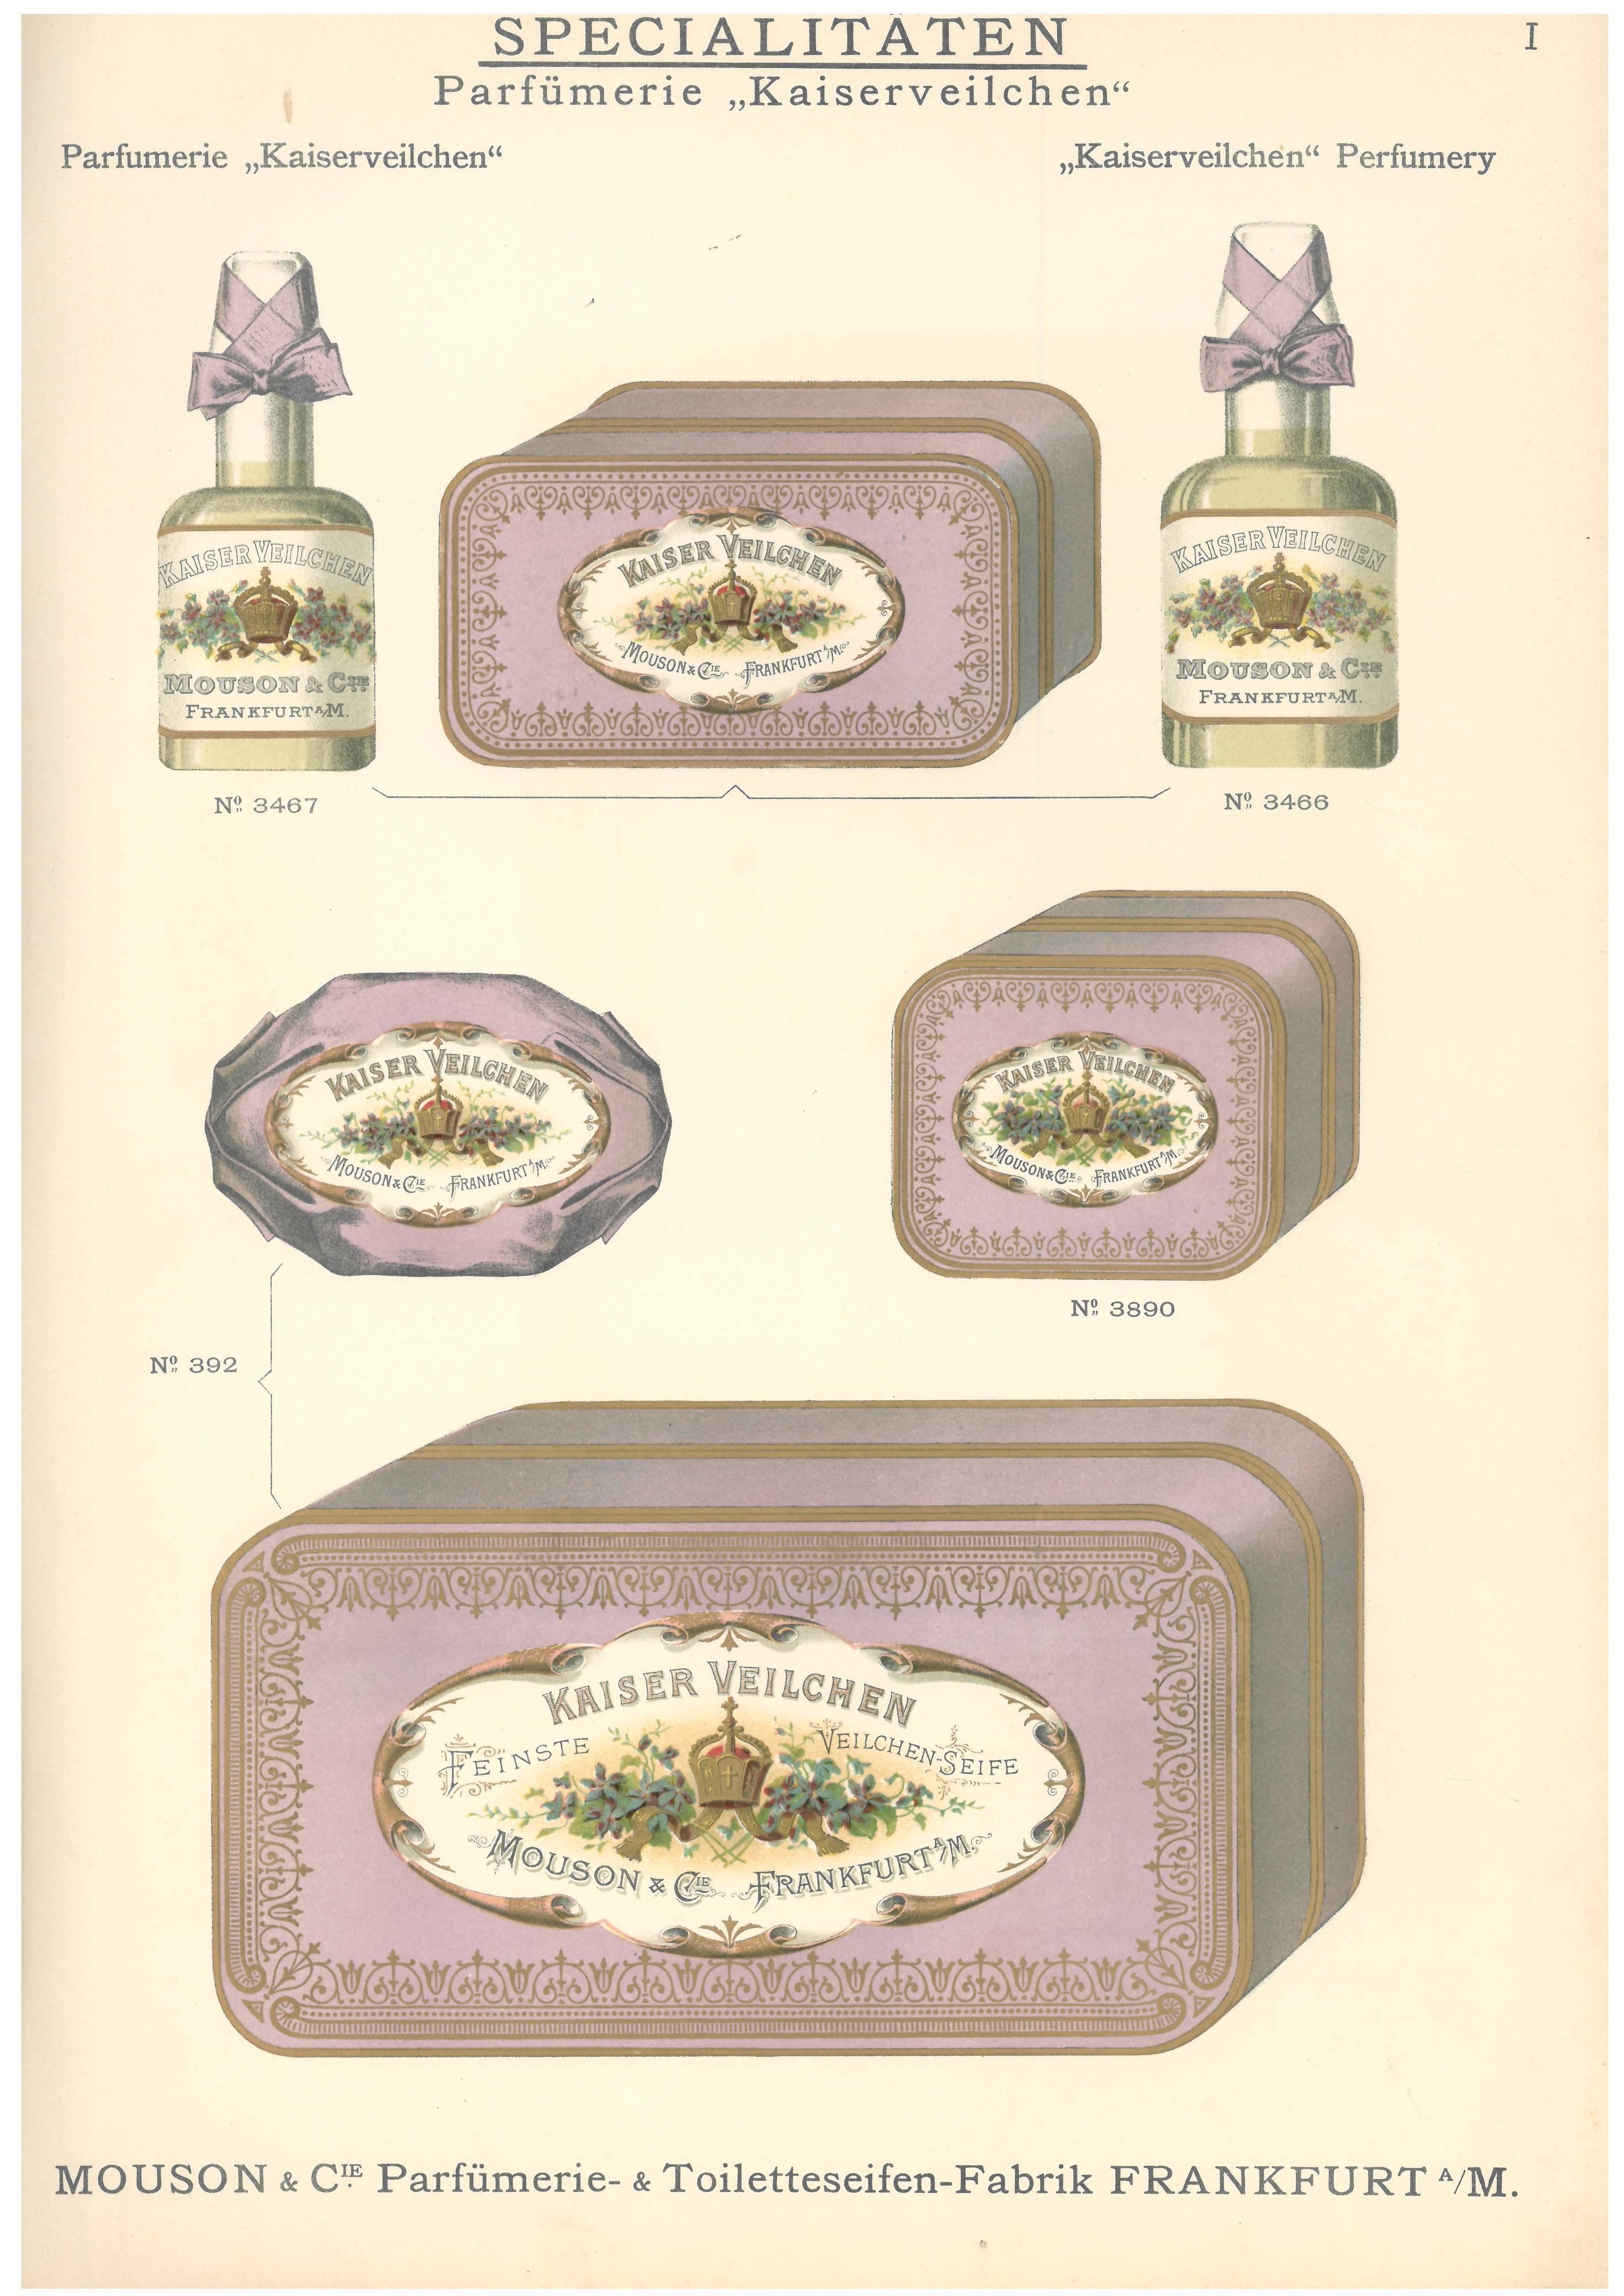 Catalogue of Perfumes, Toiletries and Cosmetics
A rare sale catalogue of luxury goods including perfumes, toiletries and soaps from the early years of the twentieth century produced by Mousons & Cie of Frankfurt. Lavishly illustrated with over 750